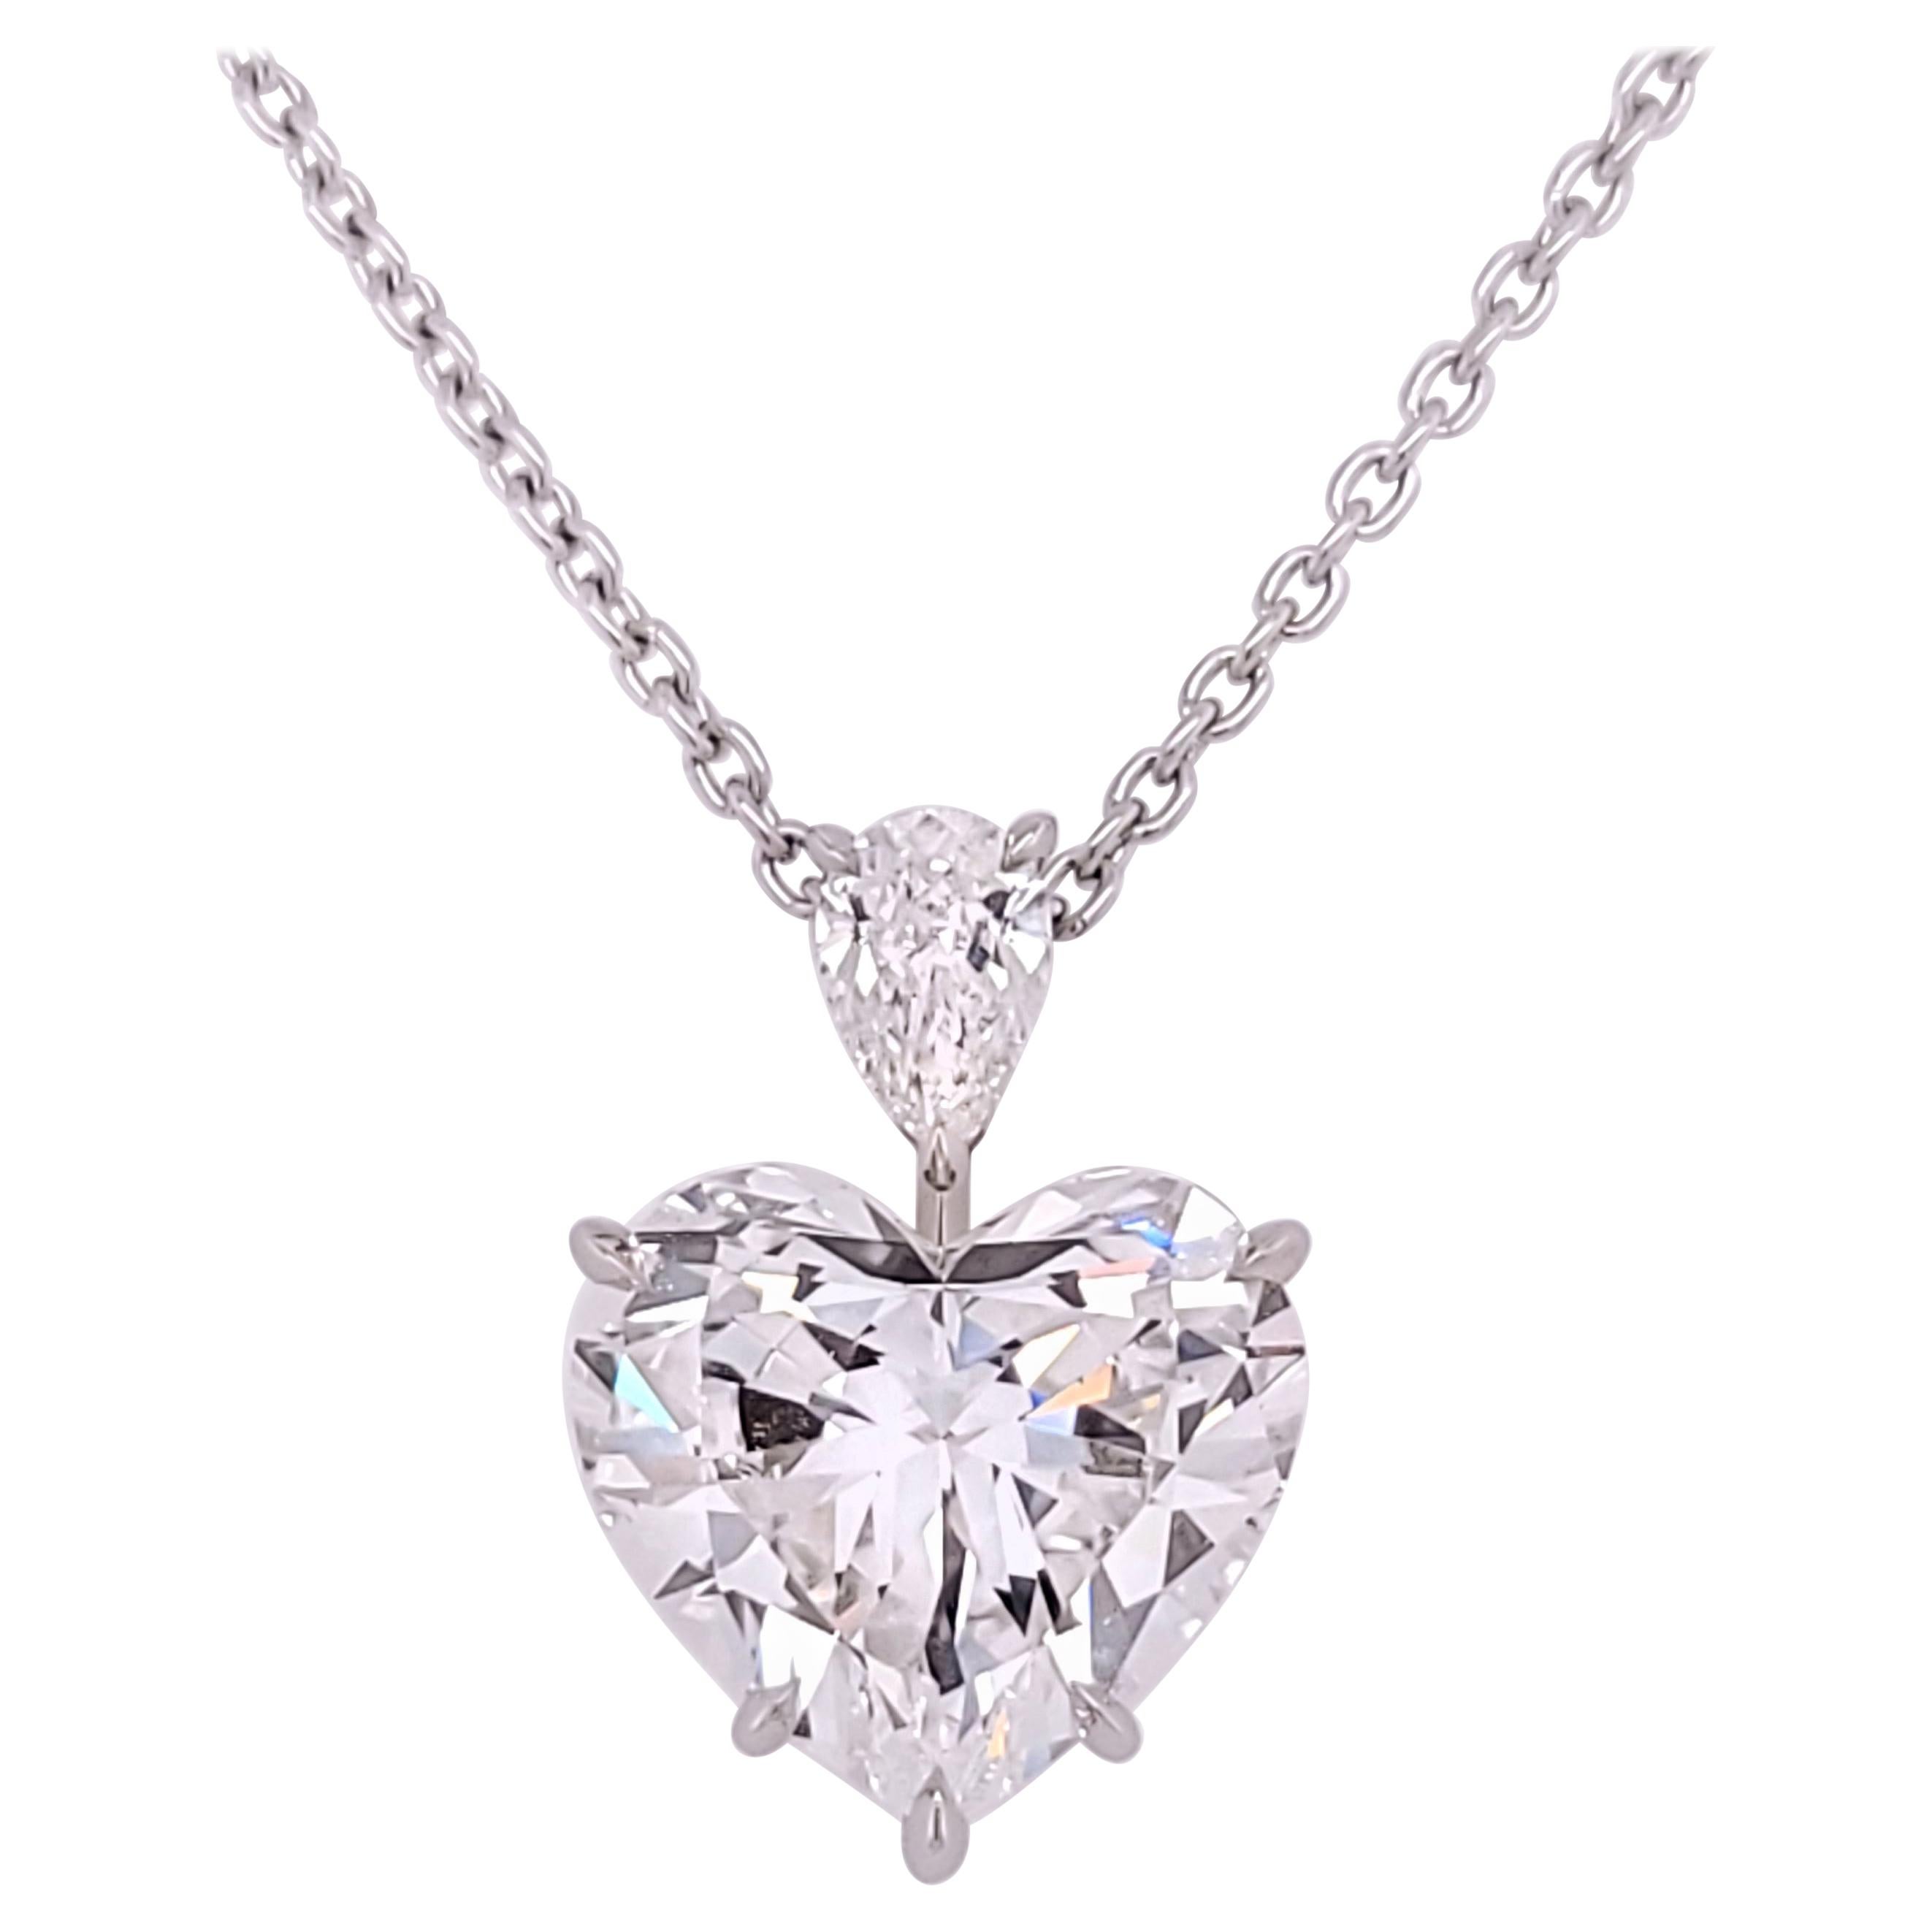 7.54 Heart-Shaped D IF Diamond Pendant GIA Certified For Sale